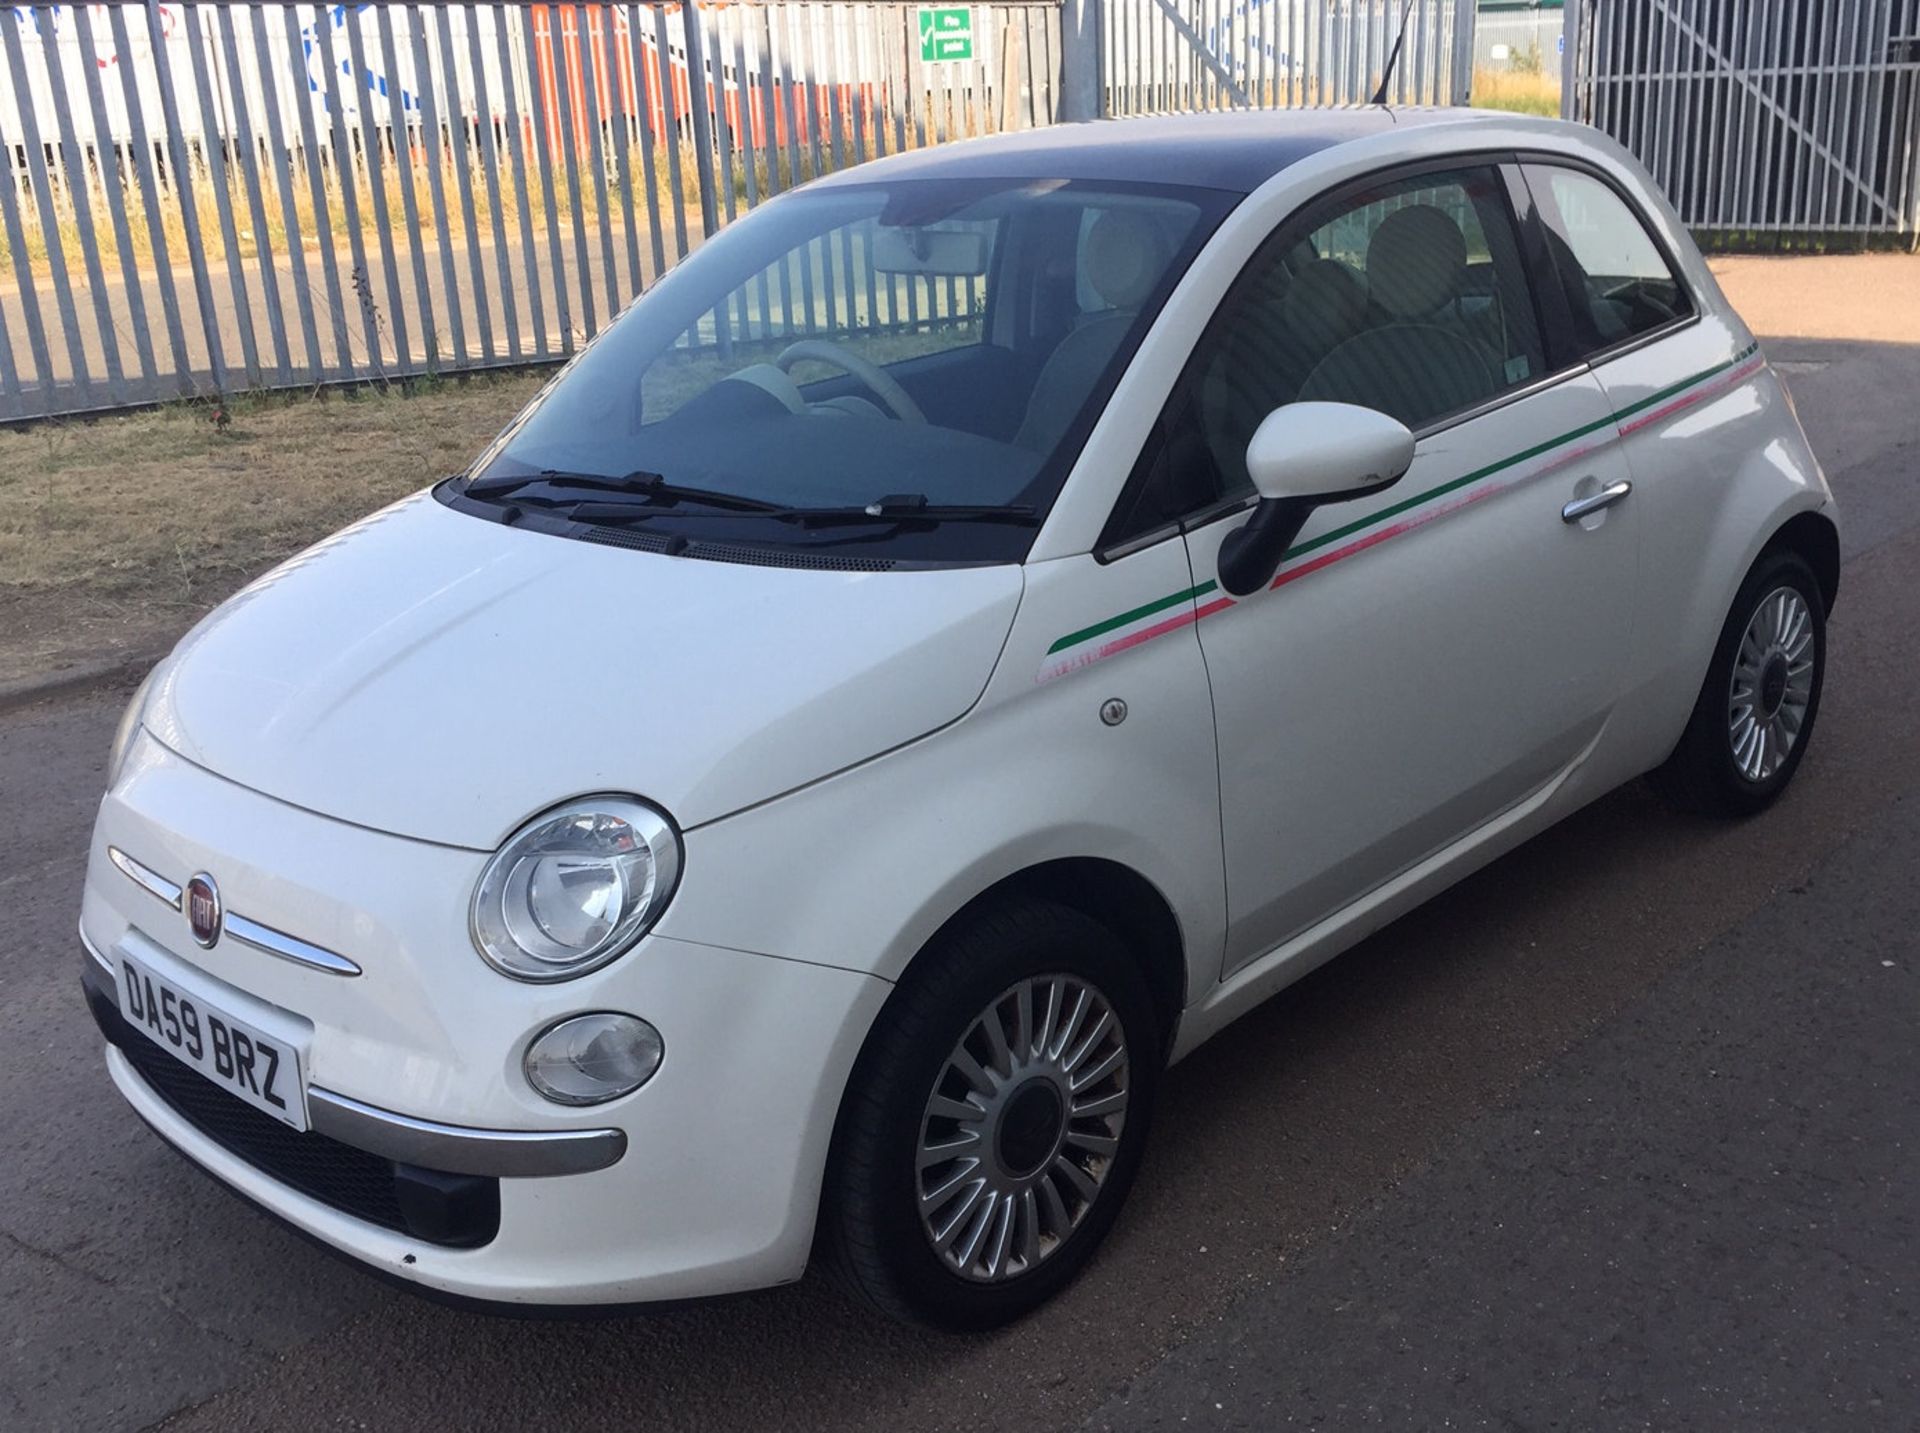 2009 Fiat 500 1.2 Lounge 3 Dr Hatchback - CL505 - NO VAT ON THE HAMMER - Location: Corby, Northampto - Image 11 of 12